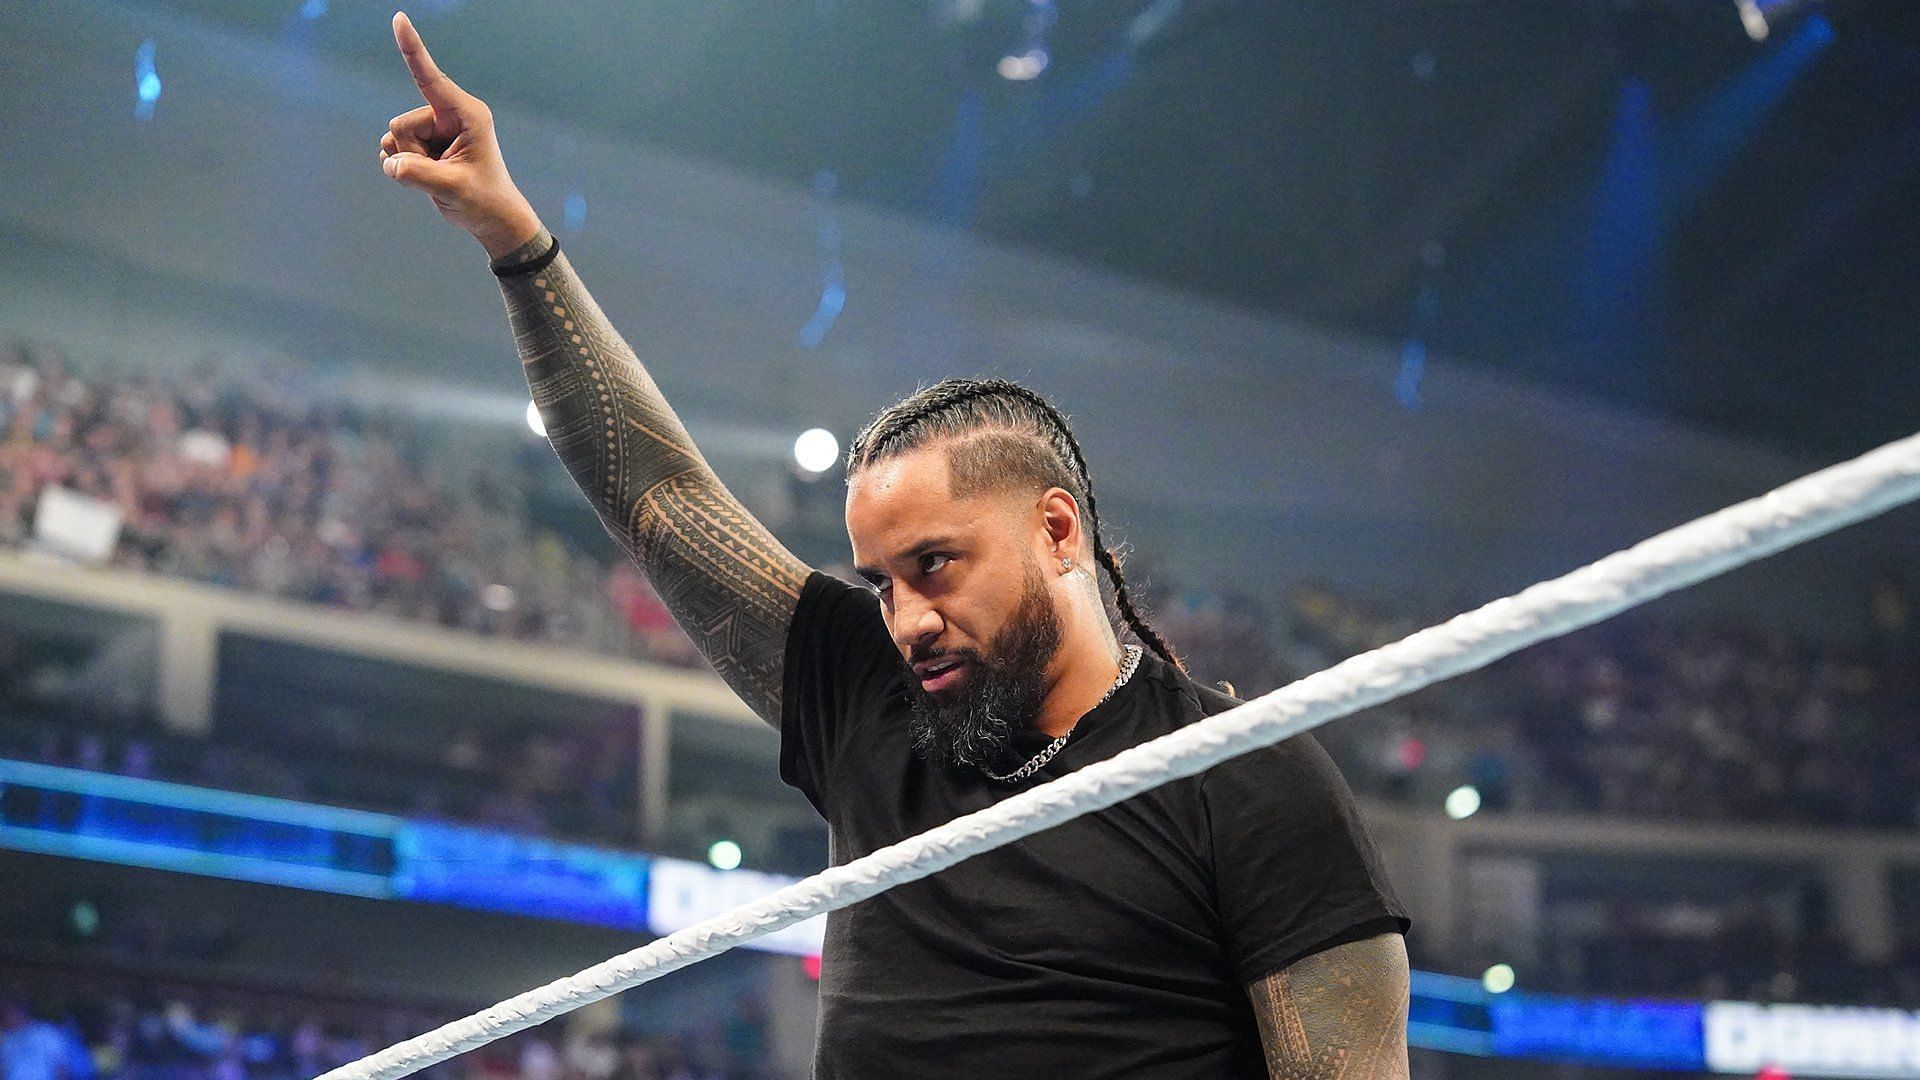 Jimmy Uso on SmackDown.